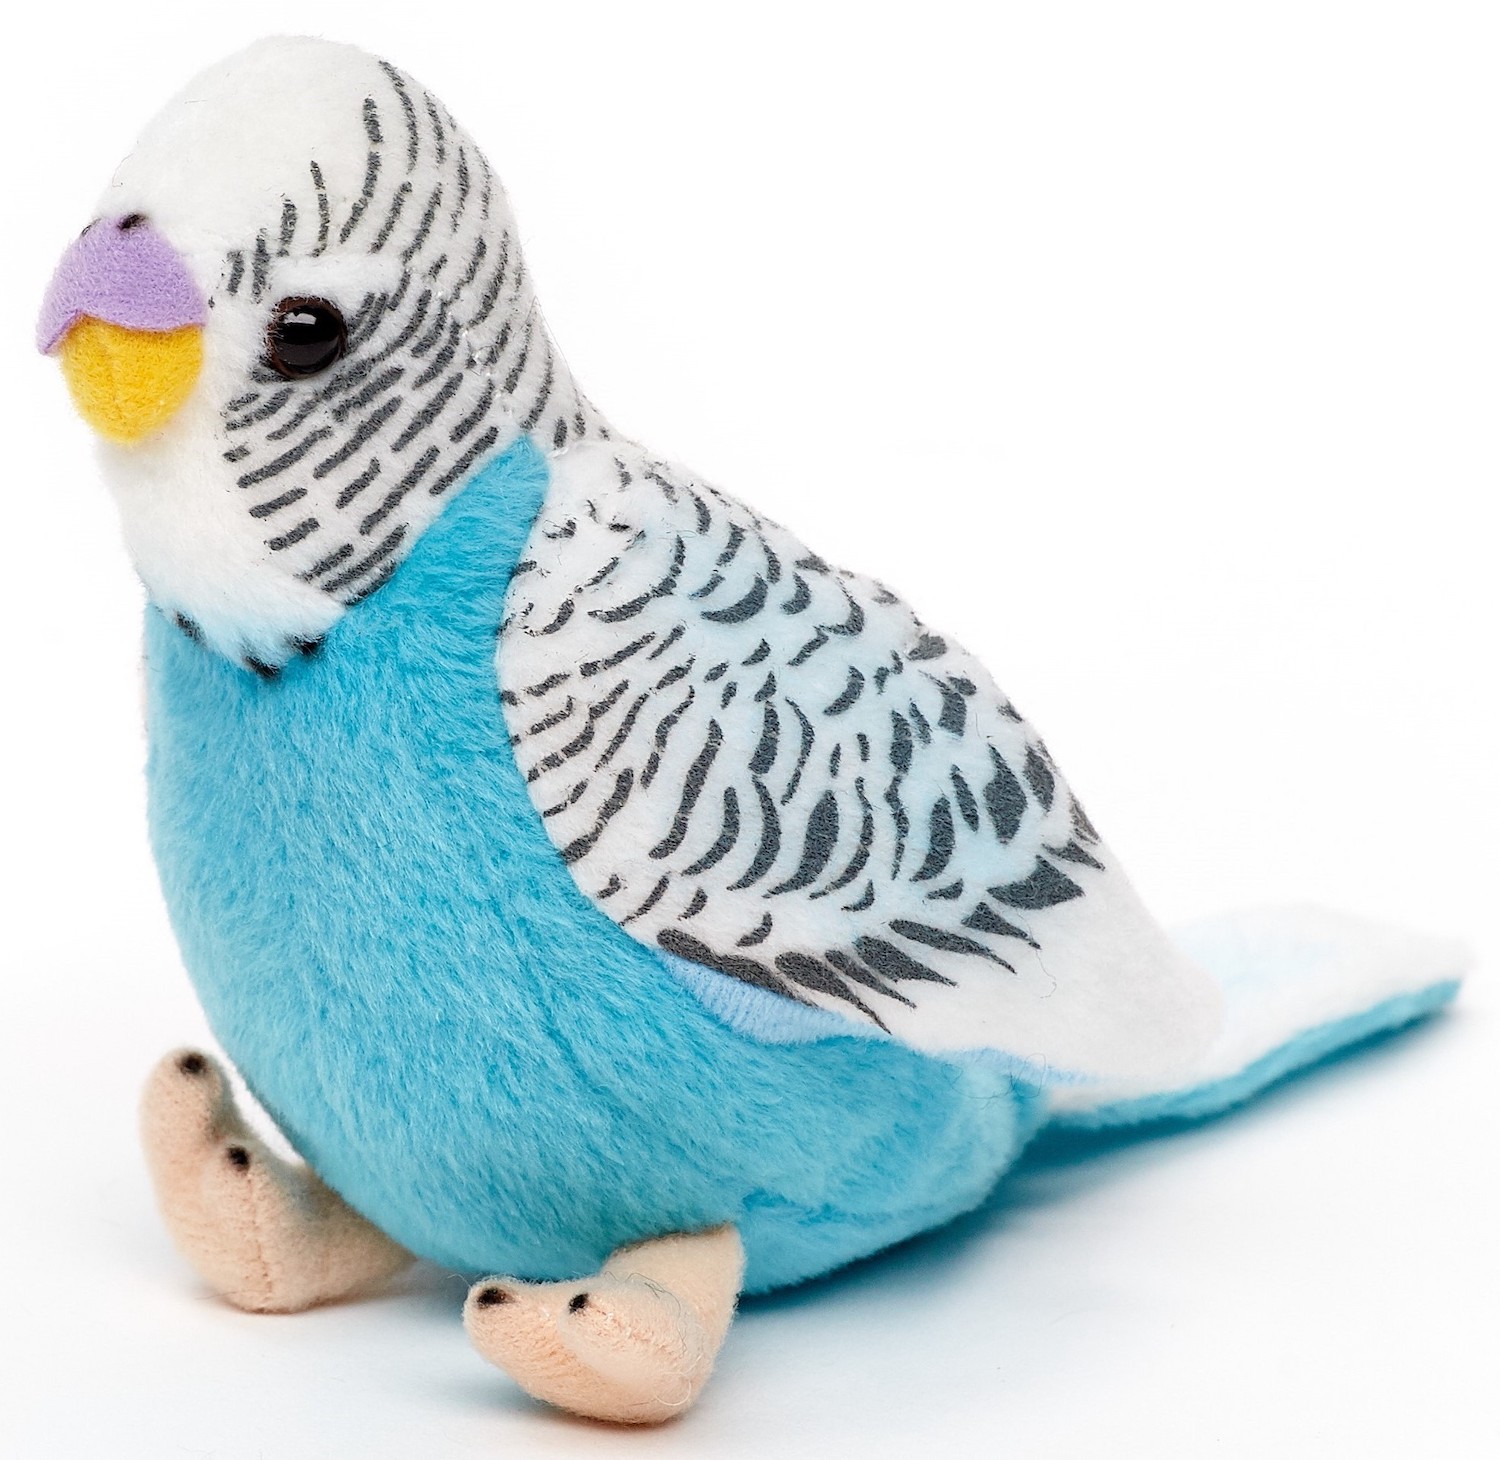 Uni-Toys - budgie (blue) with twittering voice - 12 cm (height) - bird - plush toy, cuddly toy 